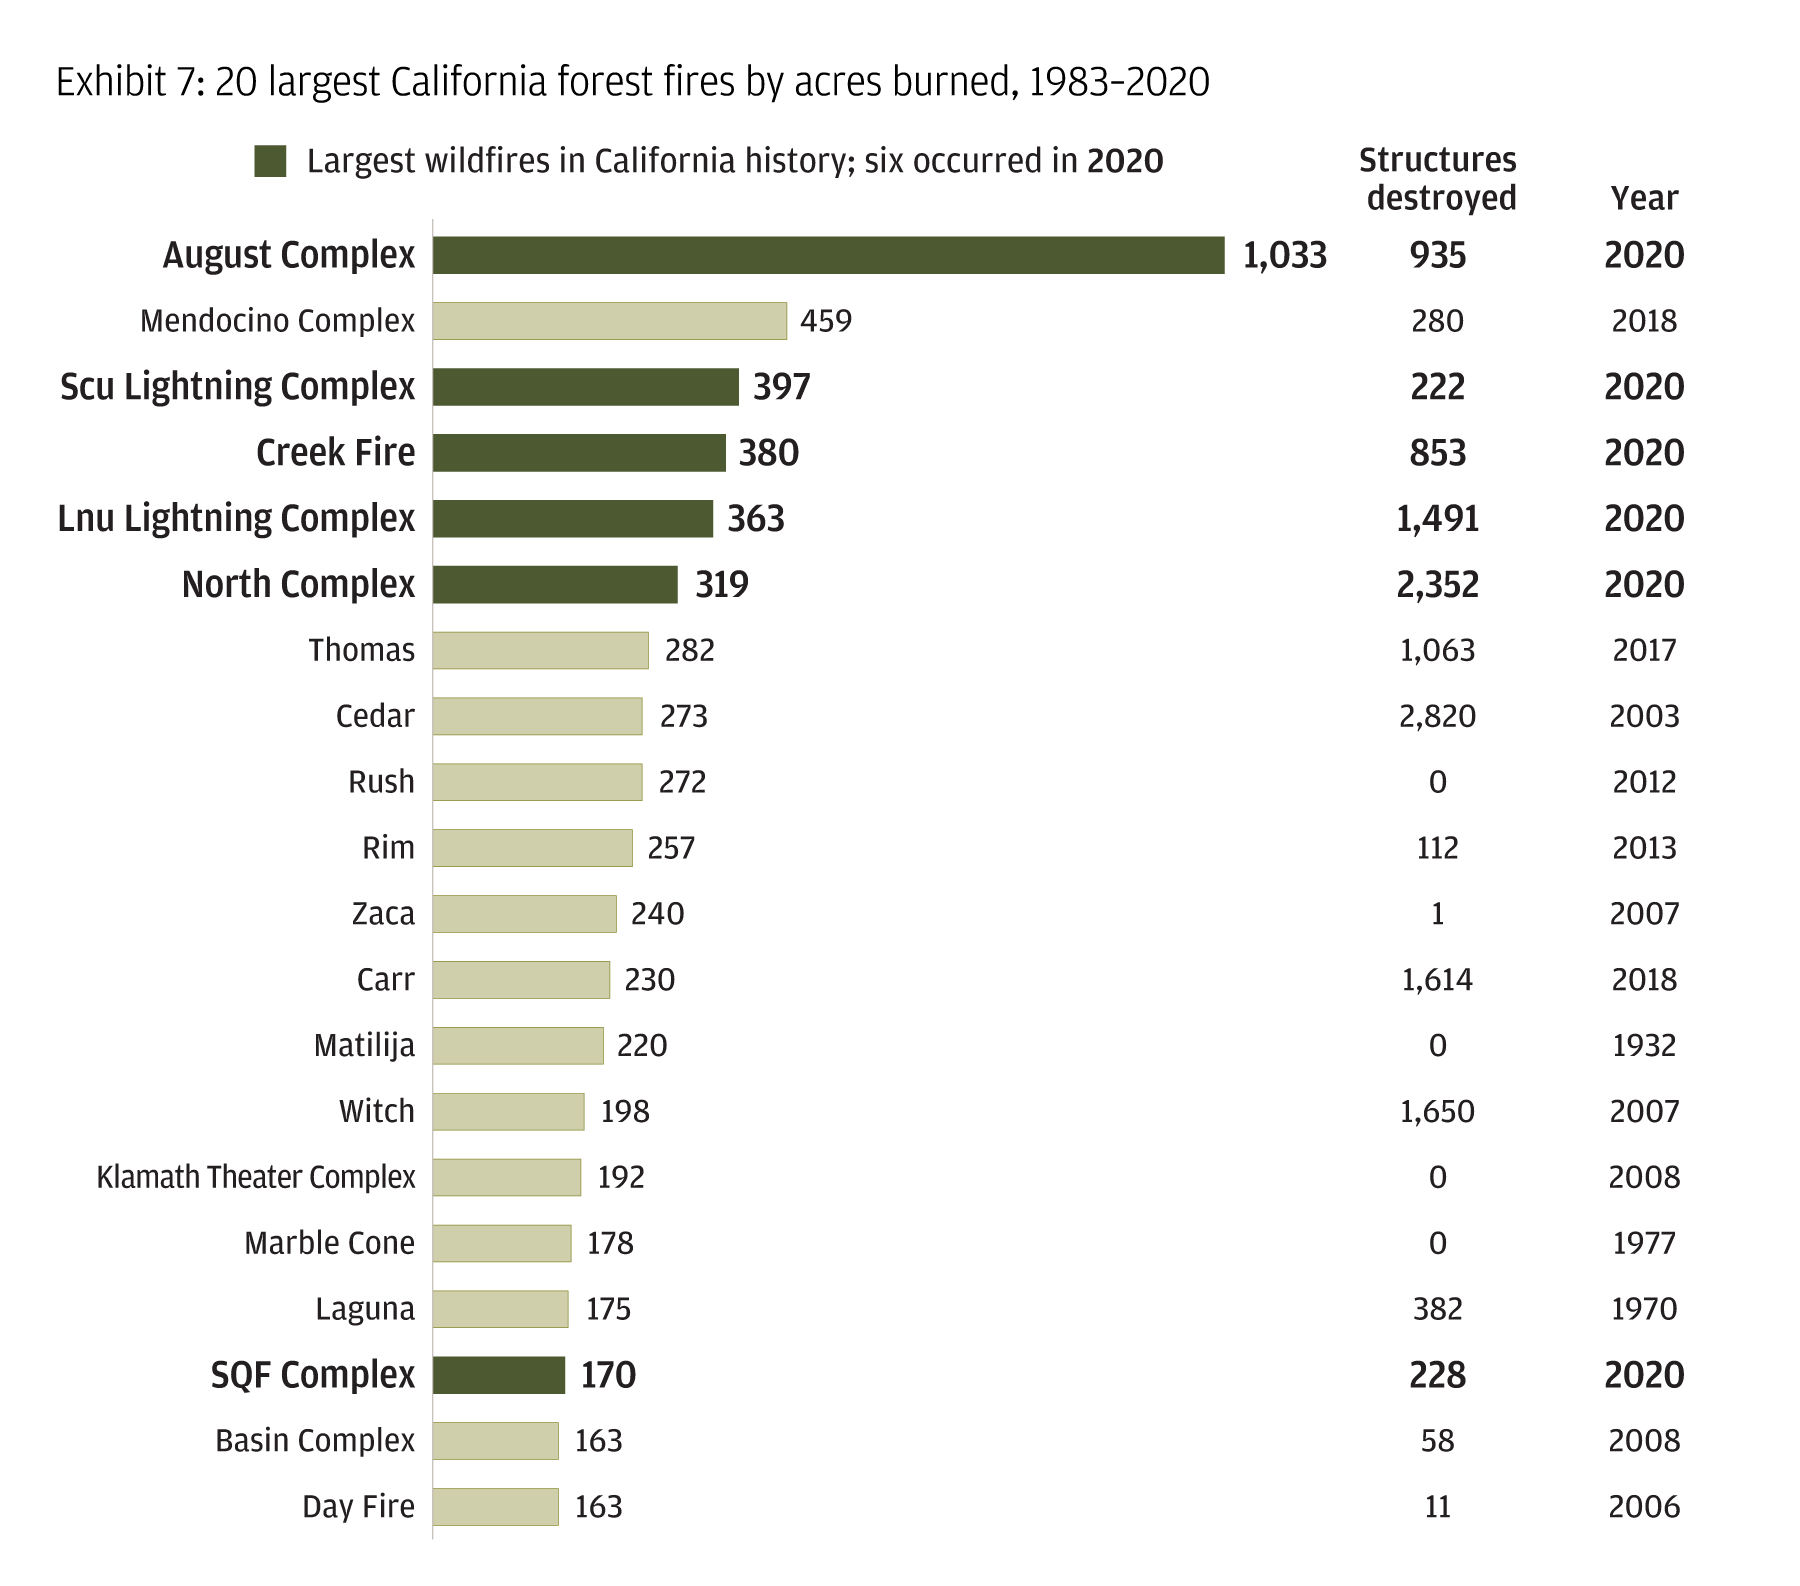 Bar chart shows relative size of largest California wildfires ever; 6 were in 2020 including the worst, August Complex fire that burned over twice the acres of any before.